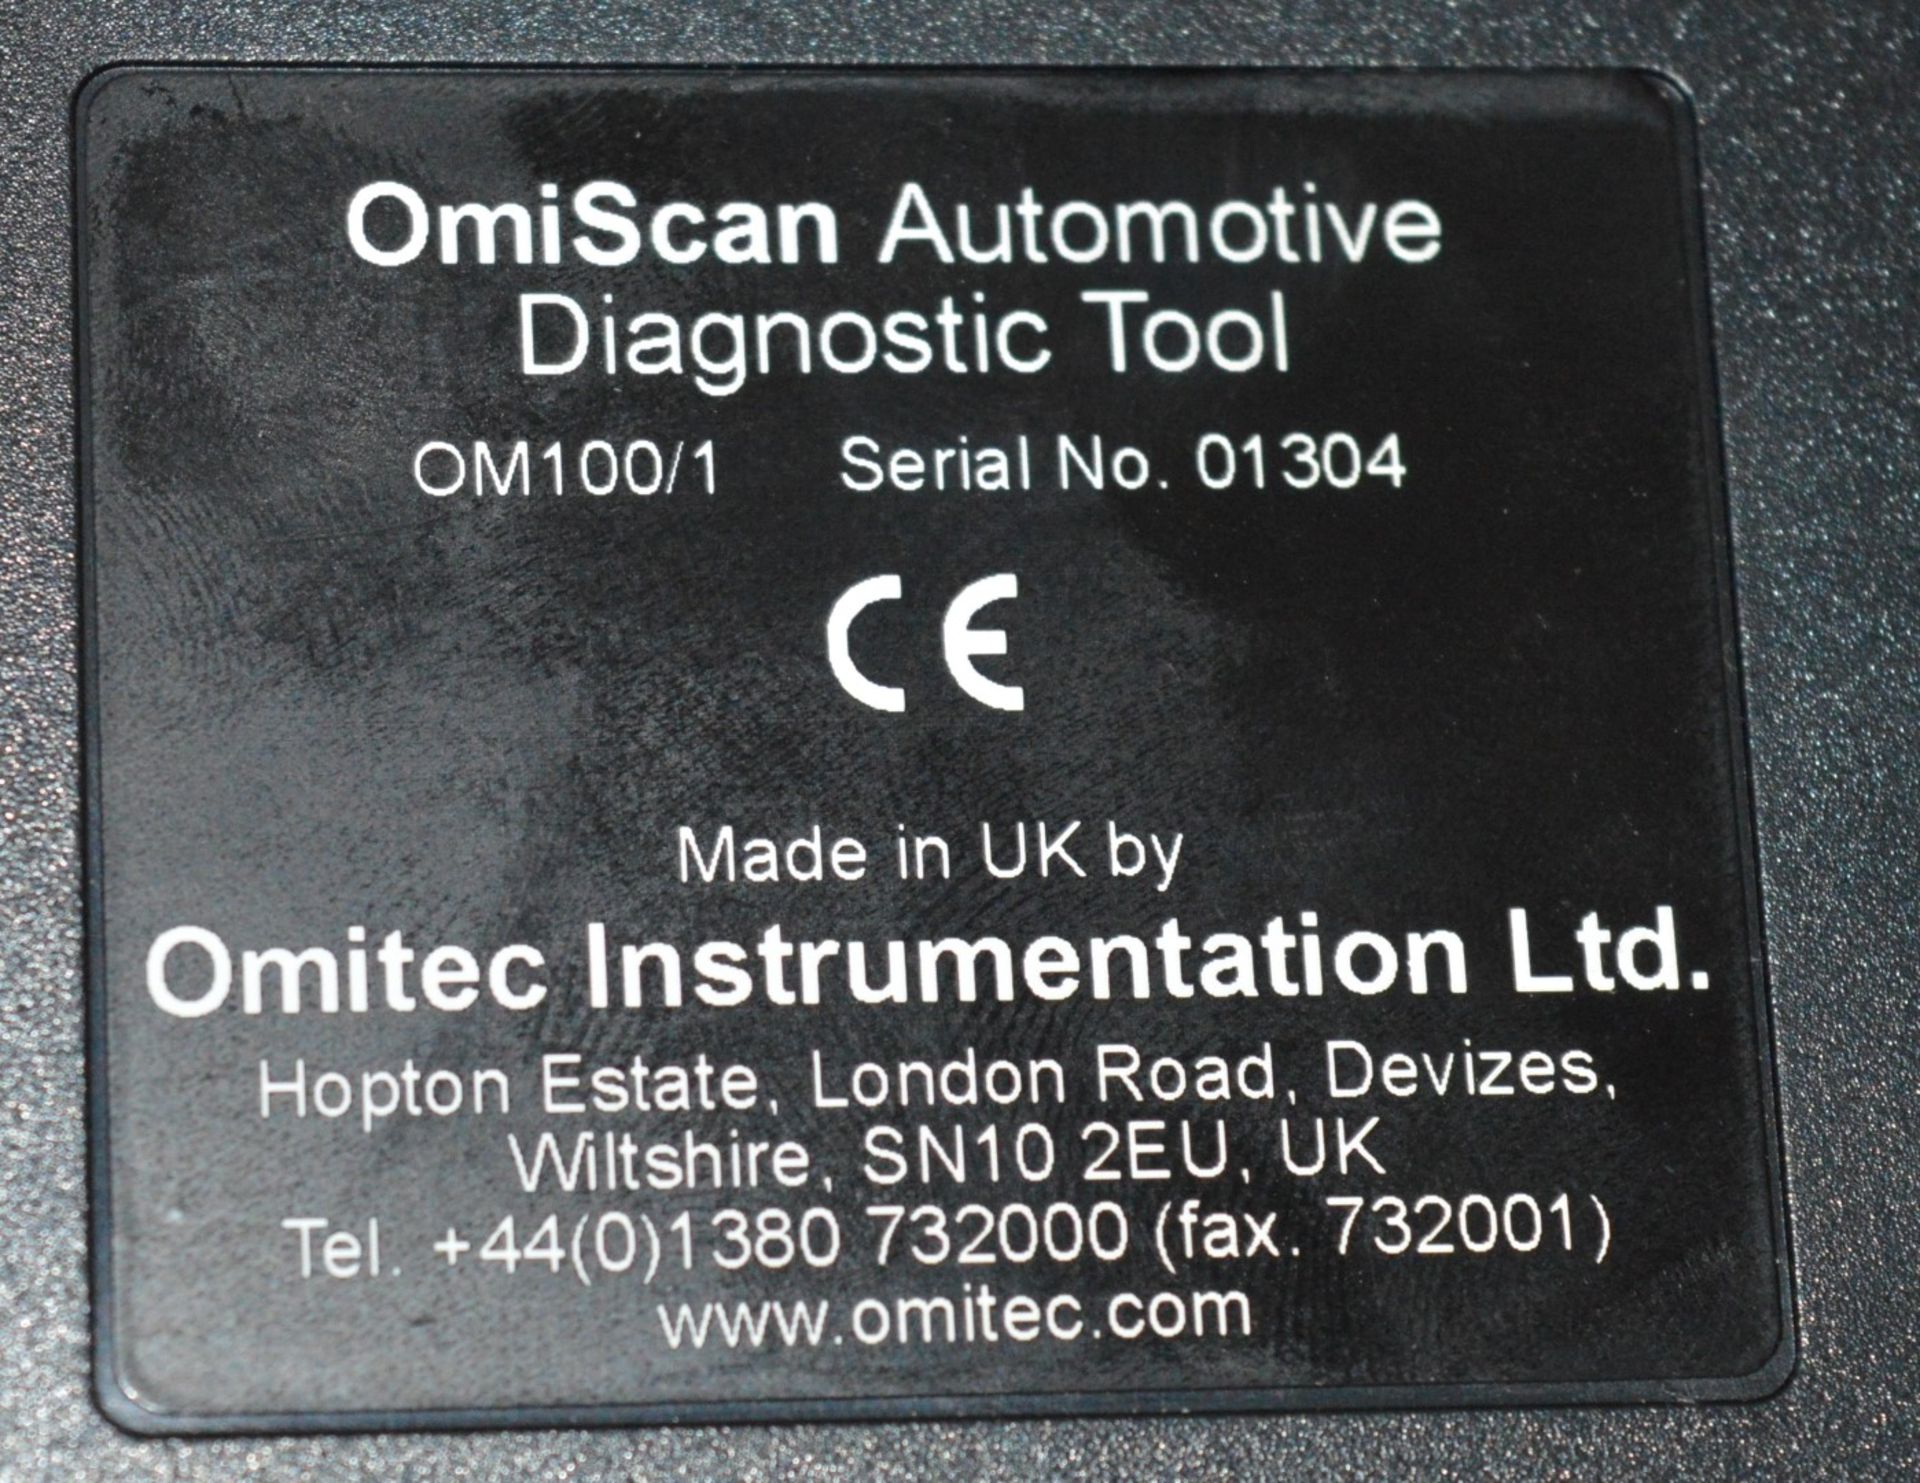 1 x Omitec OmiScan Automotive Diagnostic Tool - Model OM100/1 - Includes Carry Case, User Manual, - Image 7 of 7